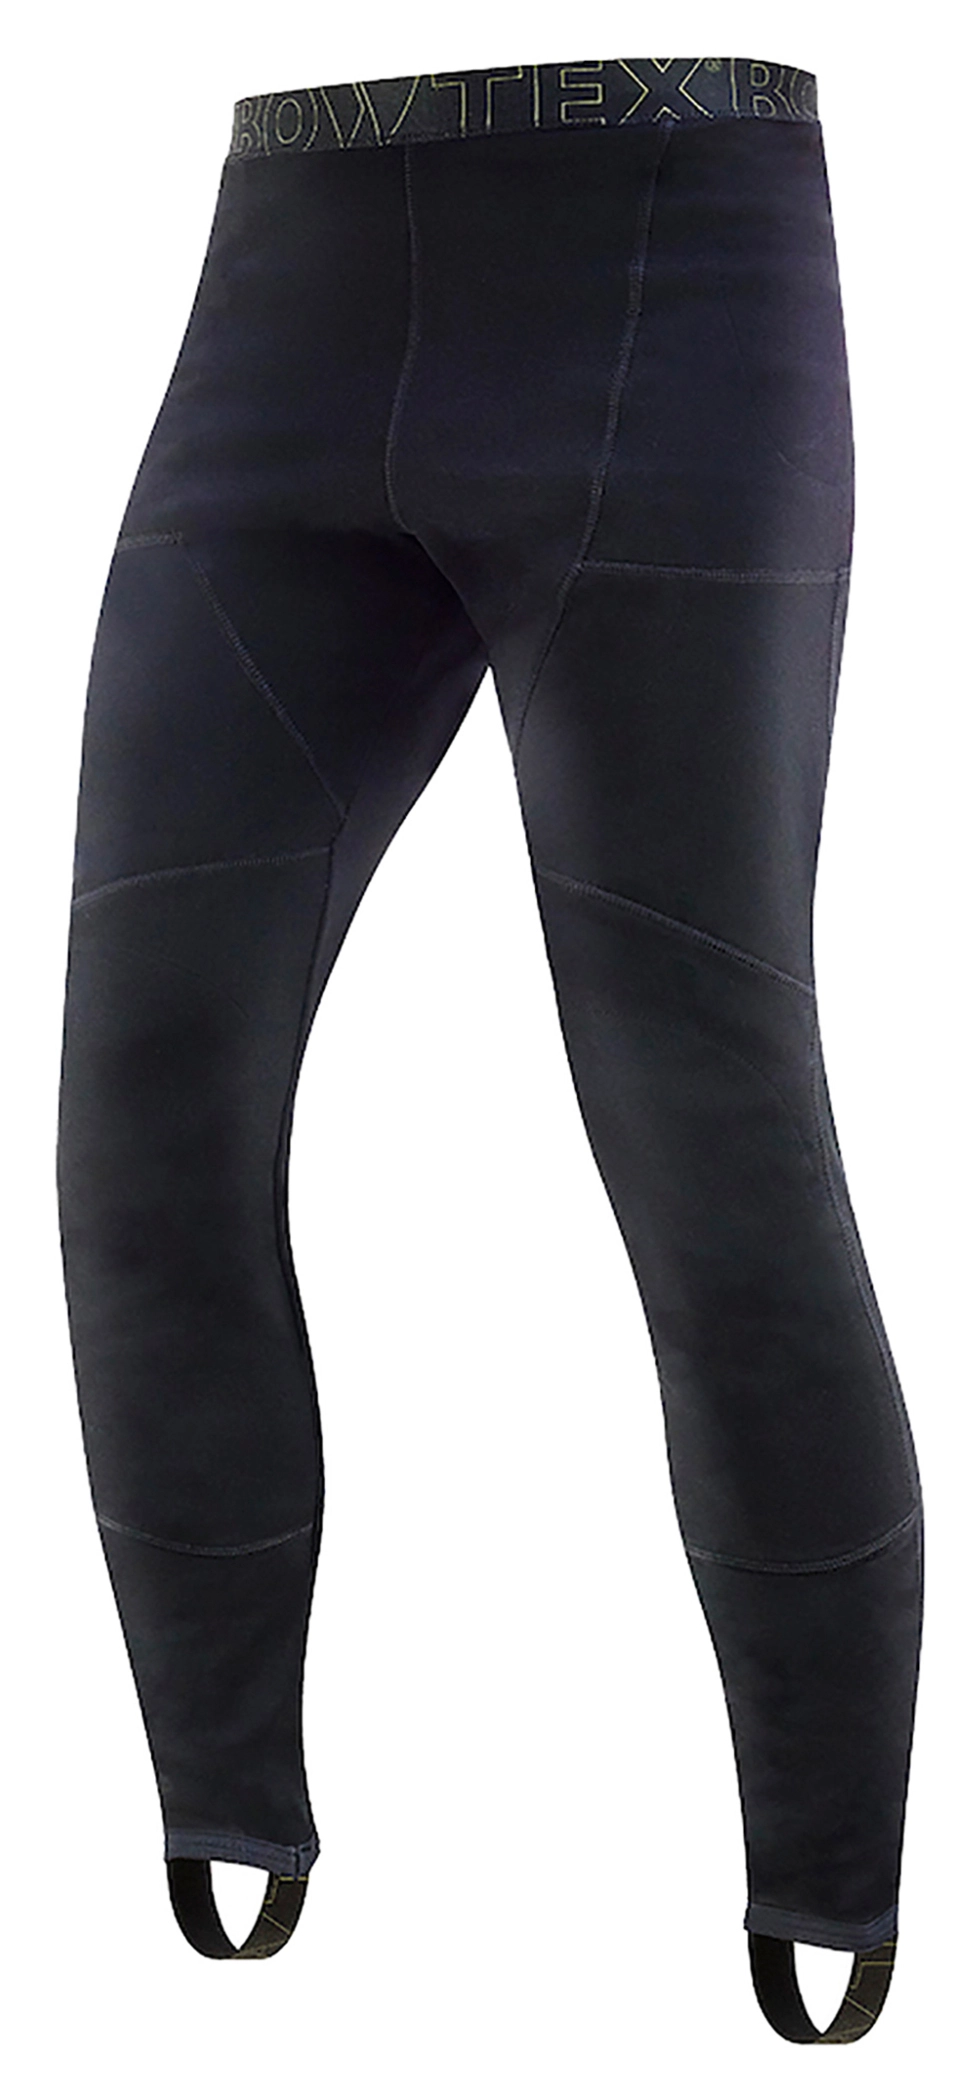 elemental Crossover leggings with pockets - Deep Water